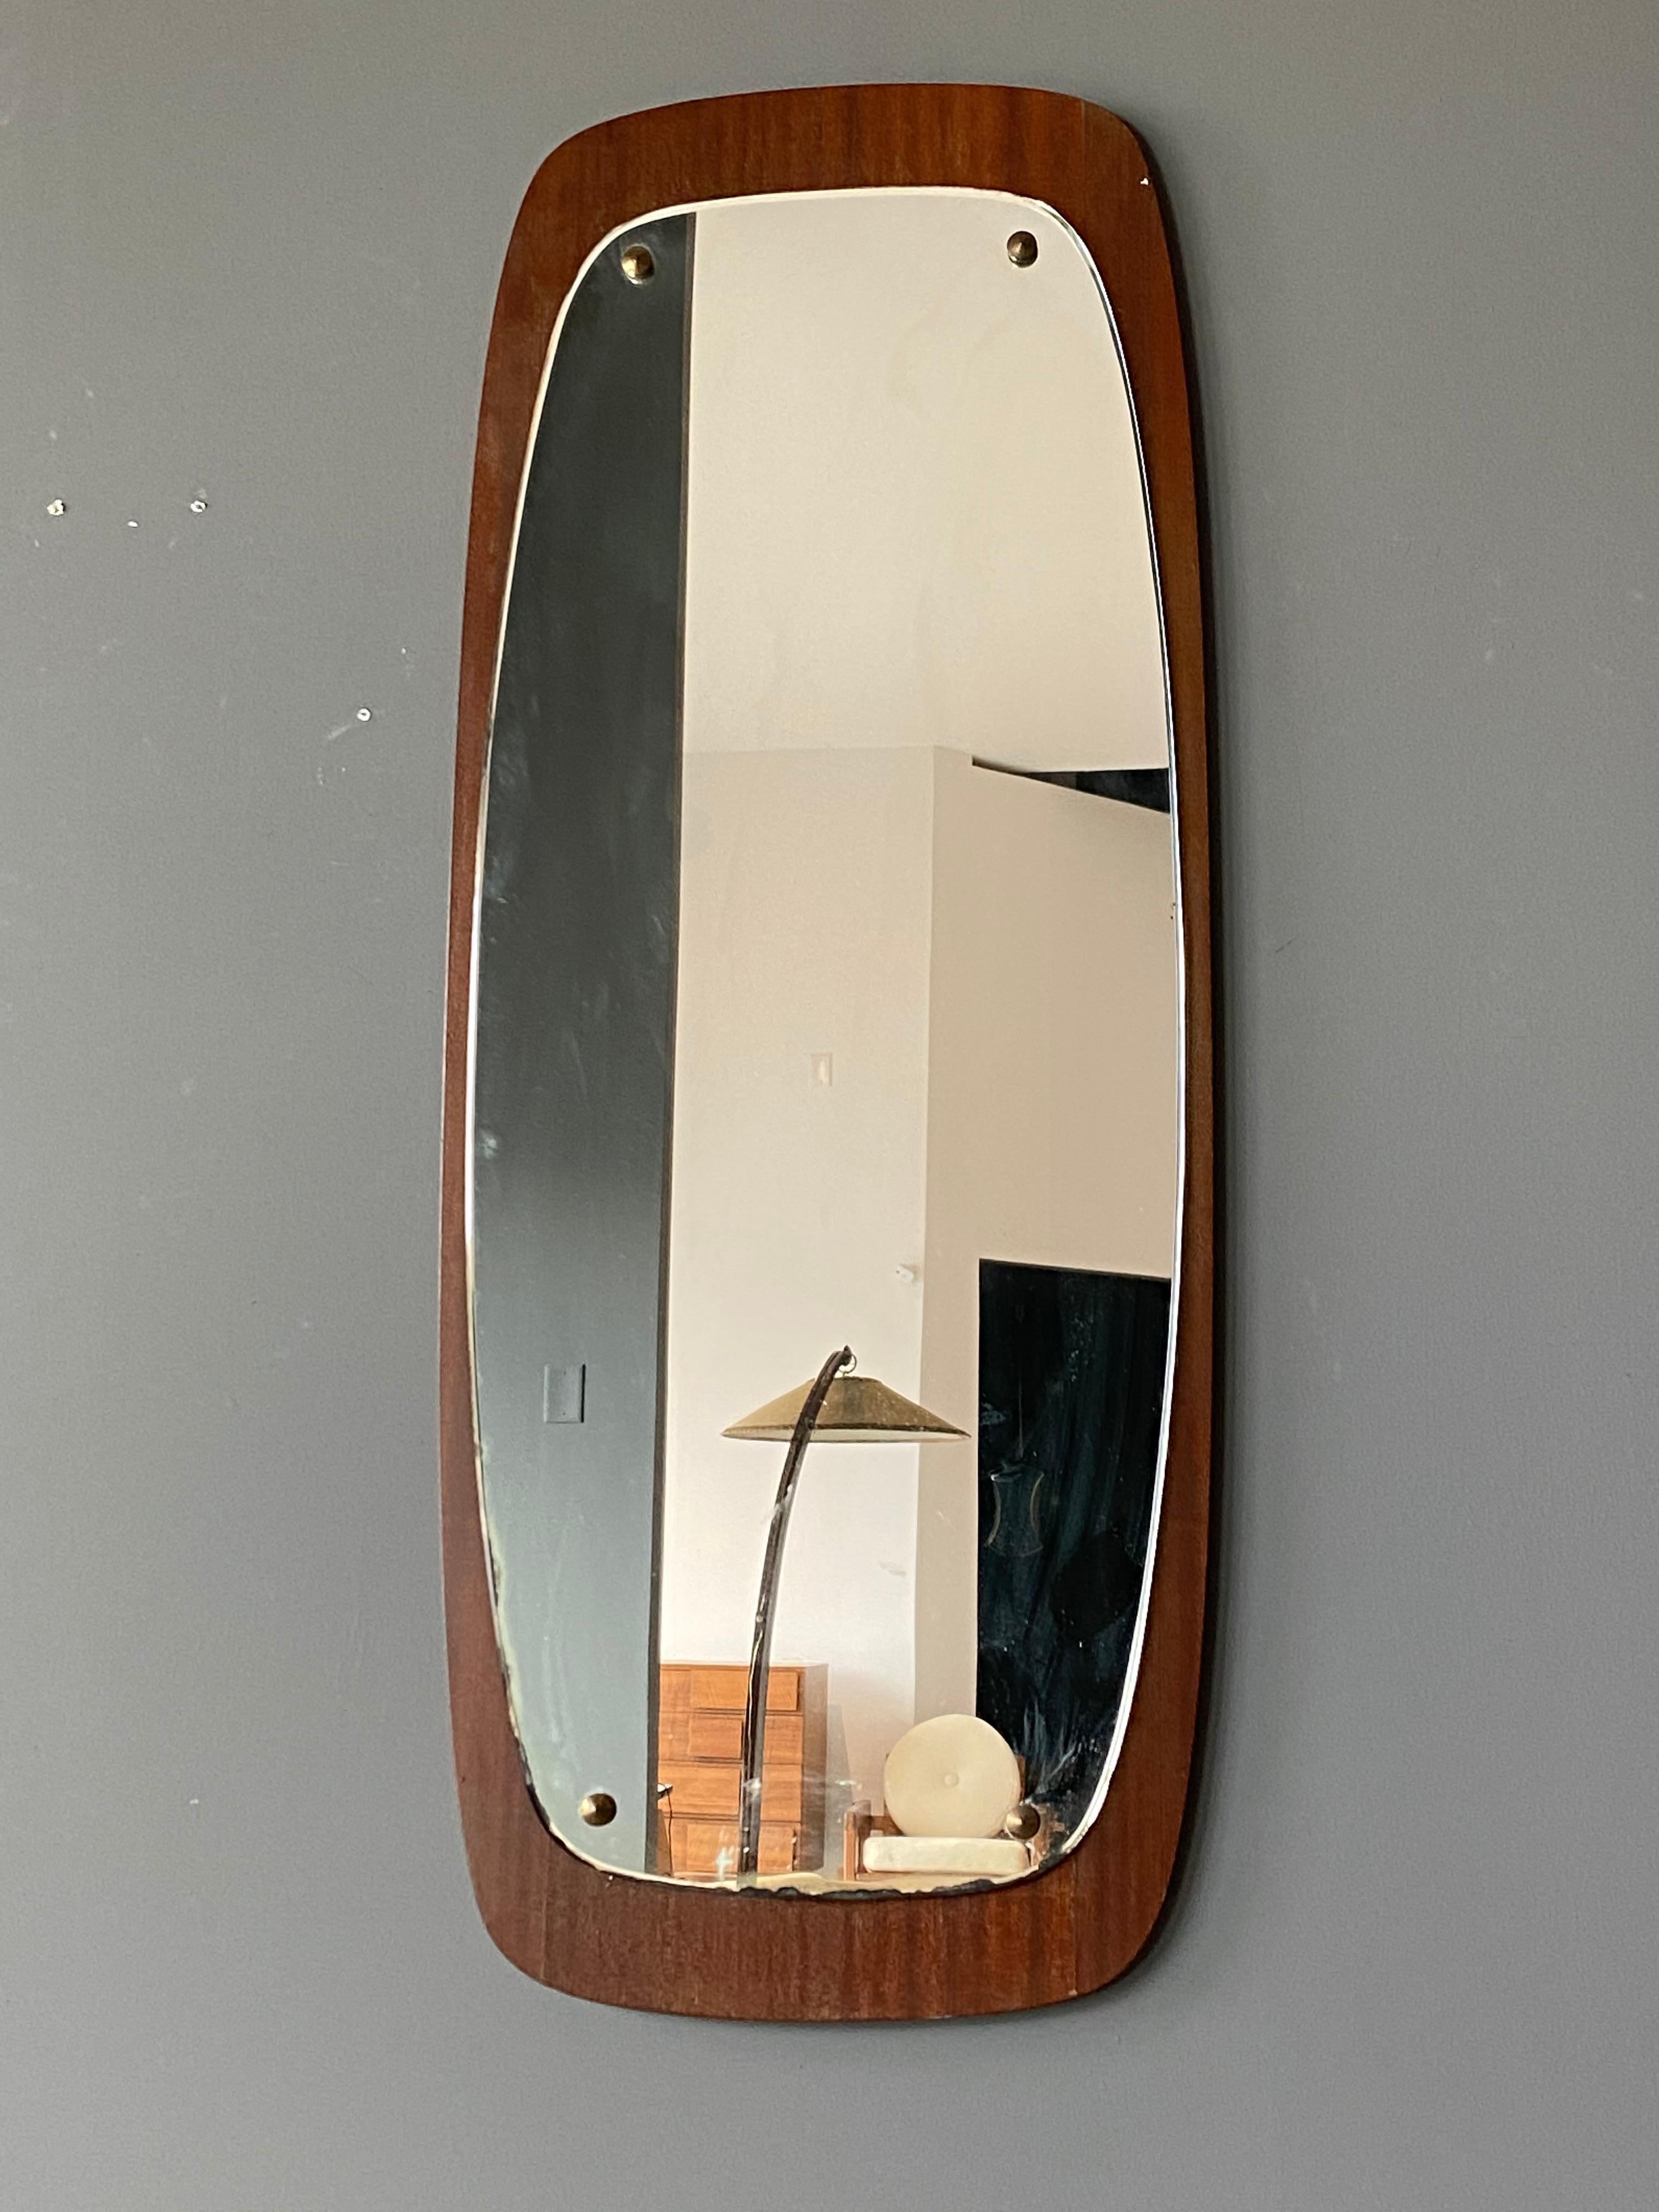 A Swedish organic modern mirror. Original mirror glass mounted on teak frame with visible brass plugs.

Other designers of the period include Finn Juhl, Campo Graffi, Fontana Arte, Josef Frank, and Hans Agne Jacobsen.